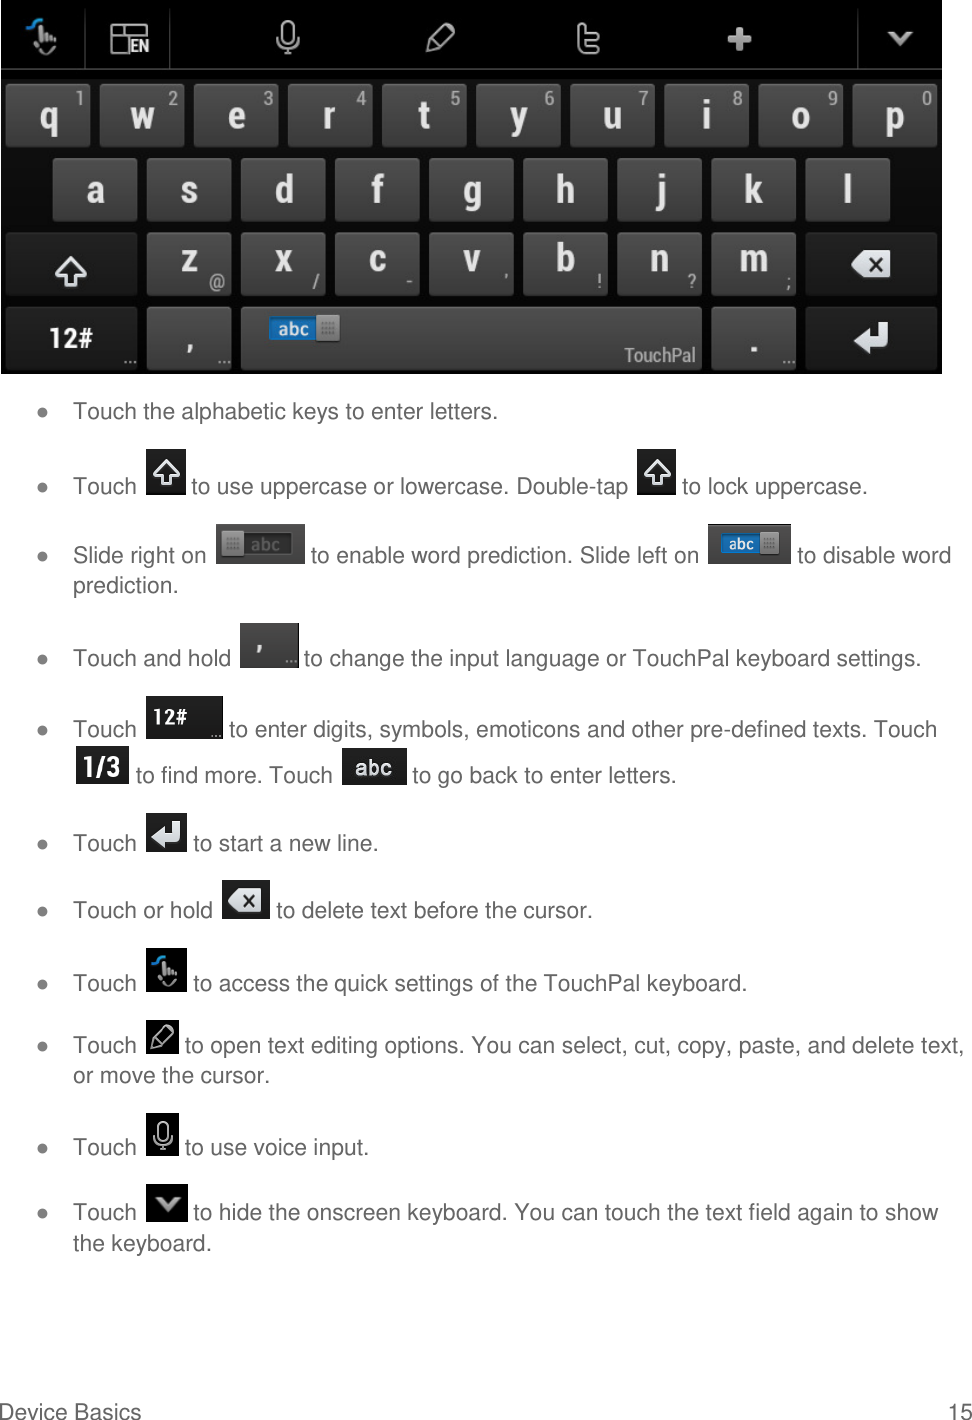  Device Basics  15  ● Touch the alphabetic keys to enter letters. ● Touch   to use uppercase or lowercase. Double-tap   to lock uppercase. ● Slide right on   to enable word prediction. Slide left on   to disable word prediction. ● Touch and hold   to change the input language or TouchPal keyboard settings. ● Touch   to enter digits, symbols, emoticons and other pre-defined texts. Touch  to find more. Touch   to go back to enter letters. ● Touch   to start a new line. ● Touch or hold   to delete text before the cursor. ● Touch   to access the quick settings of the TouchPal keyboard. ● Touch   to open text editing options. You can select, cut, copy, paste, and delete text, or move the cursor. ● Touch   to use voice input. ● Touch   to hide the onscreen keyboard. You can touch the text field again to show the keyboard. 